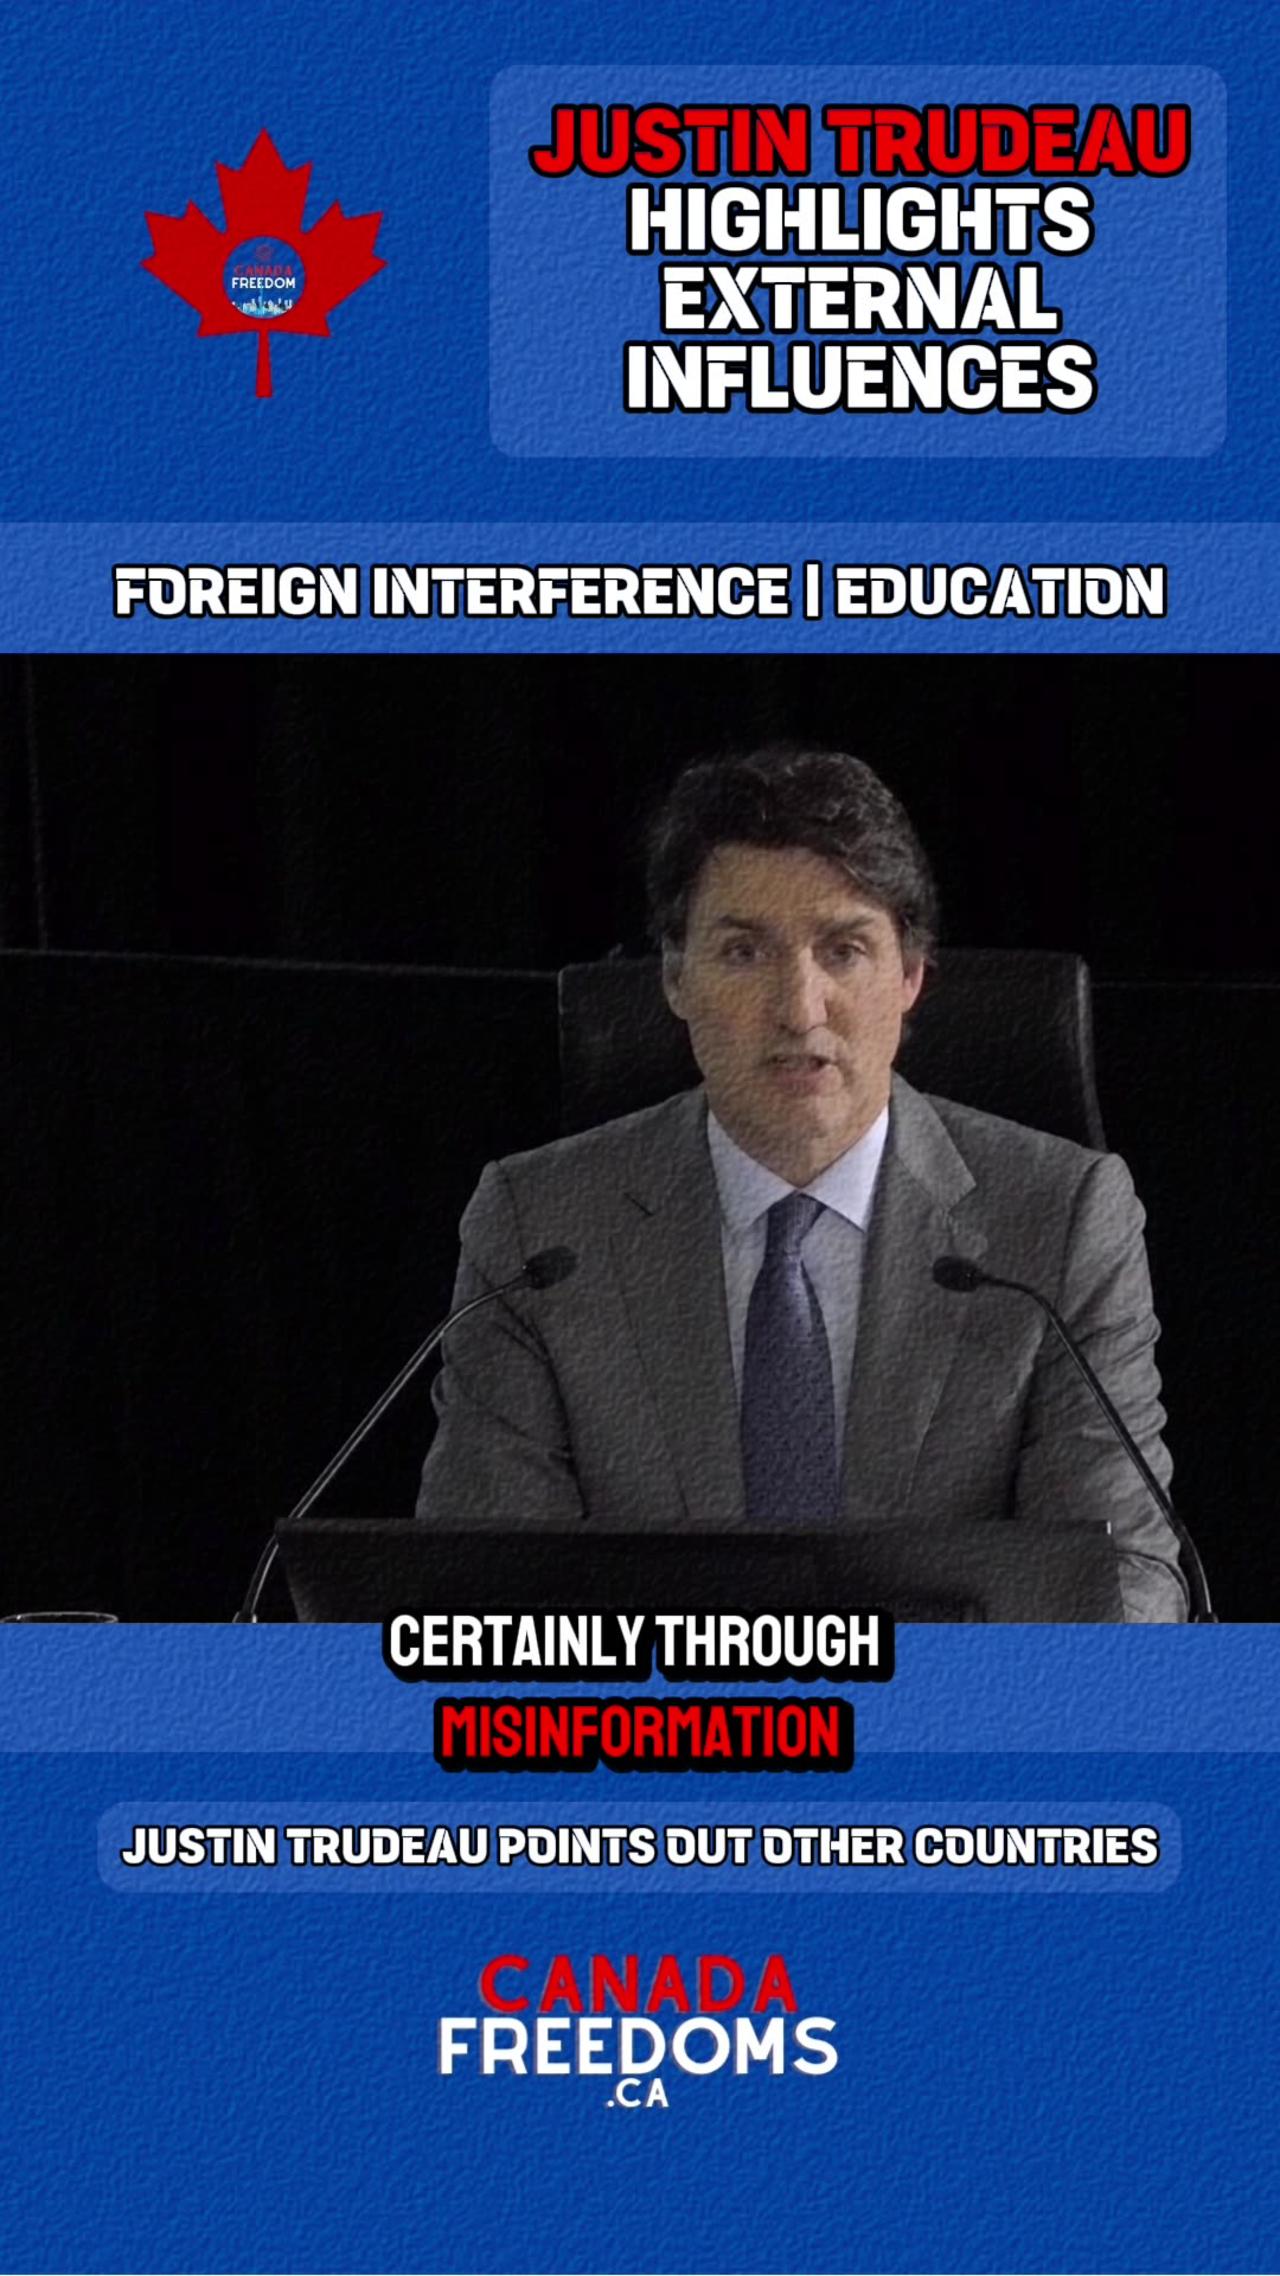 Justin Trudeau Foreign Interference | External Influences And Internal Forces